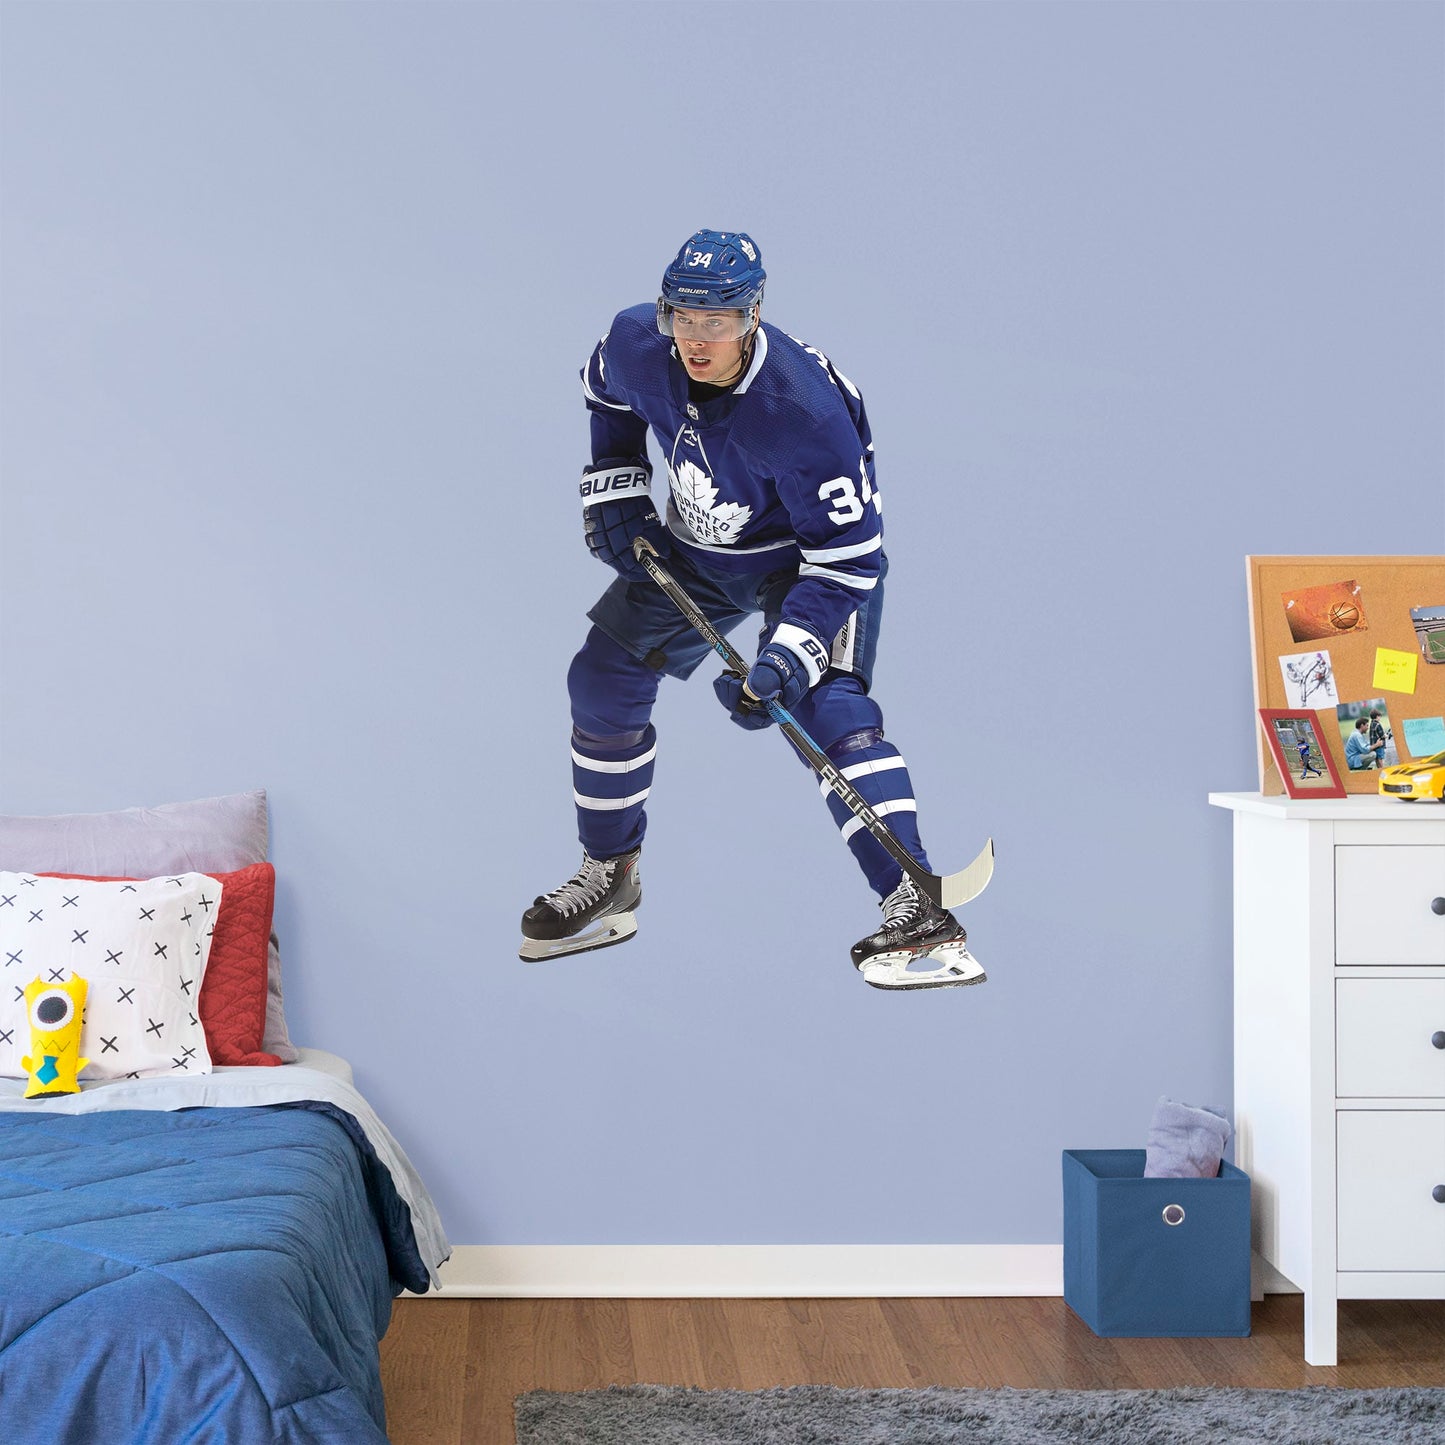 Life-Size Athlete + 7 Decals (48"W x 76"H) He was the first NHL player in modern history to land four goals in his league debut, and now, you can make the Toronto Maple Leafs’ center Auston Matthews part of your bedroom, hallway or game room. Affectionately known as Matty, Austino and Mustache, among other monikers, this durable, tear-resistant NHL wall decal features No. 34 in his navy blue and white Maple Leafs best.